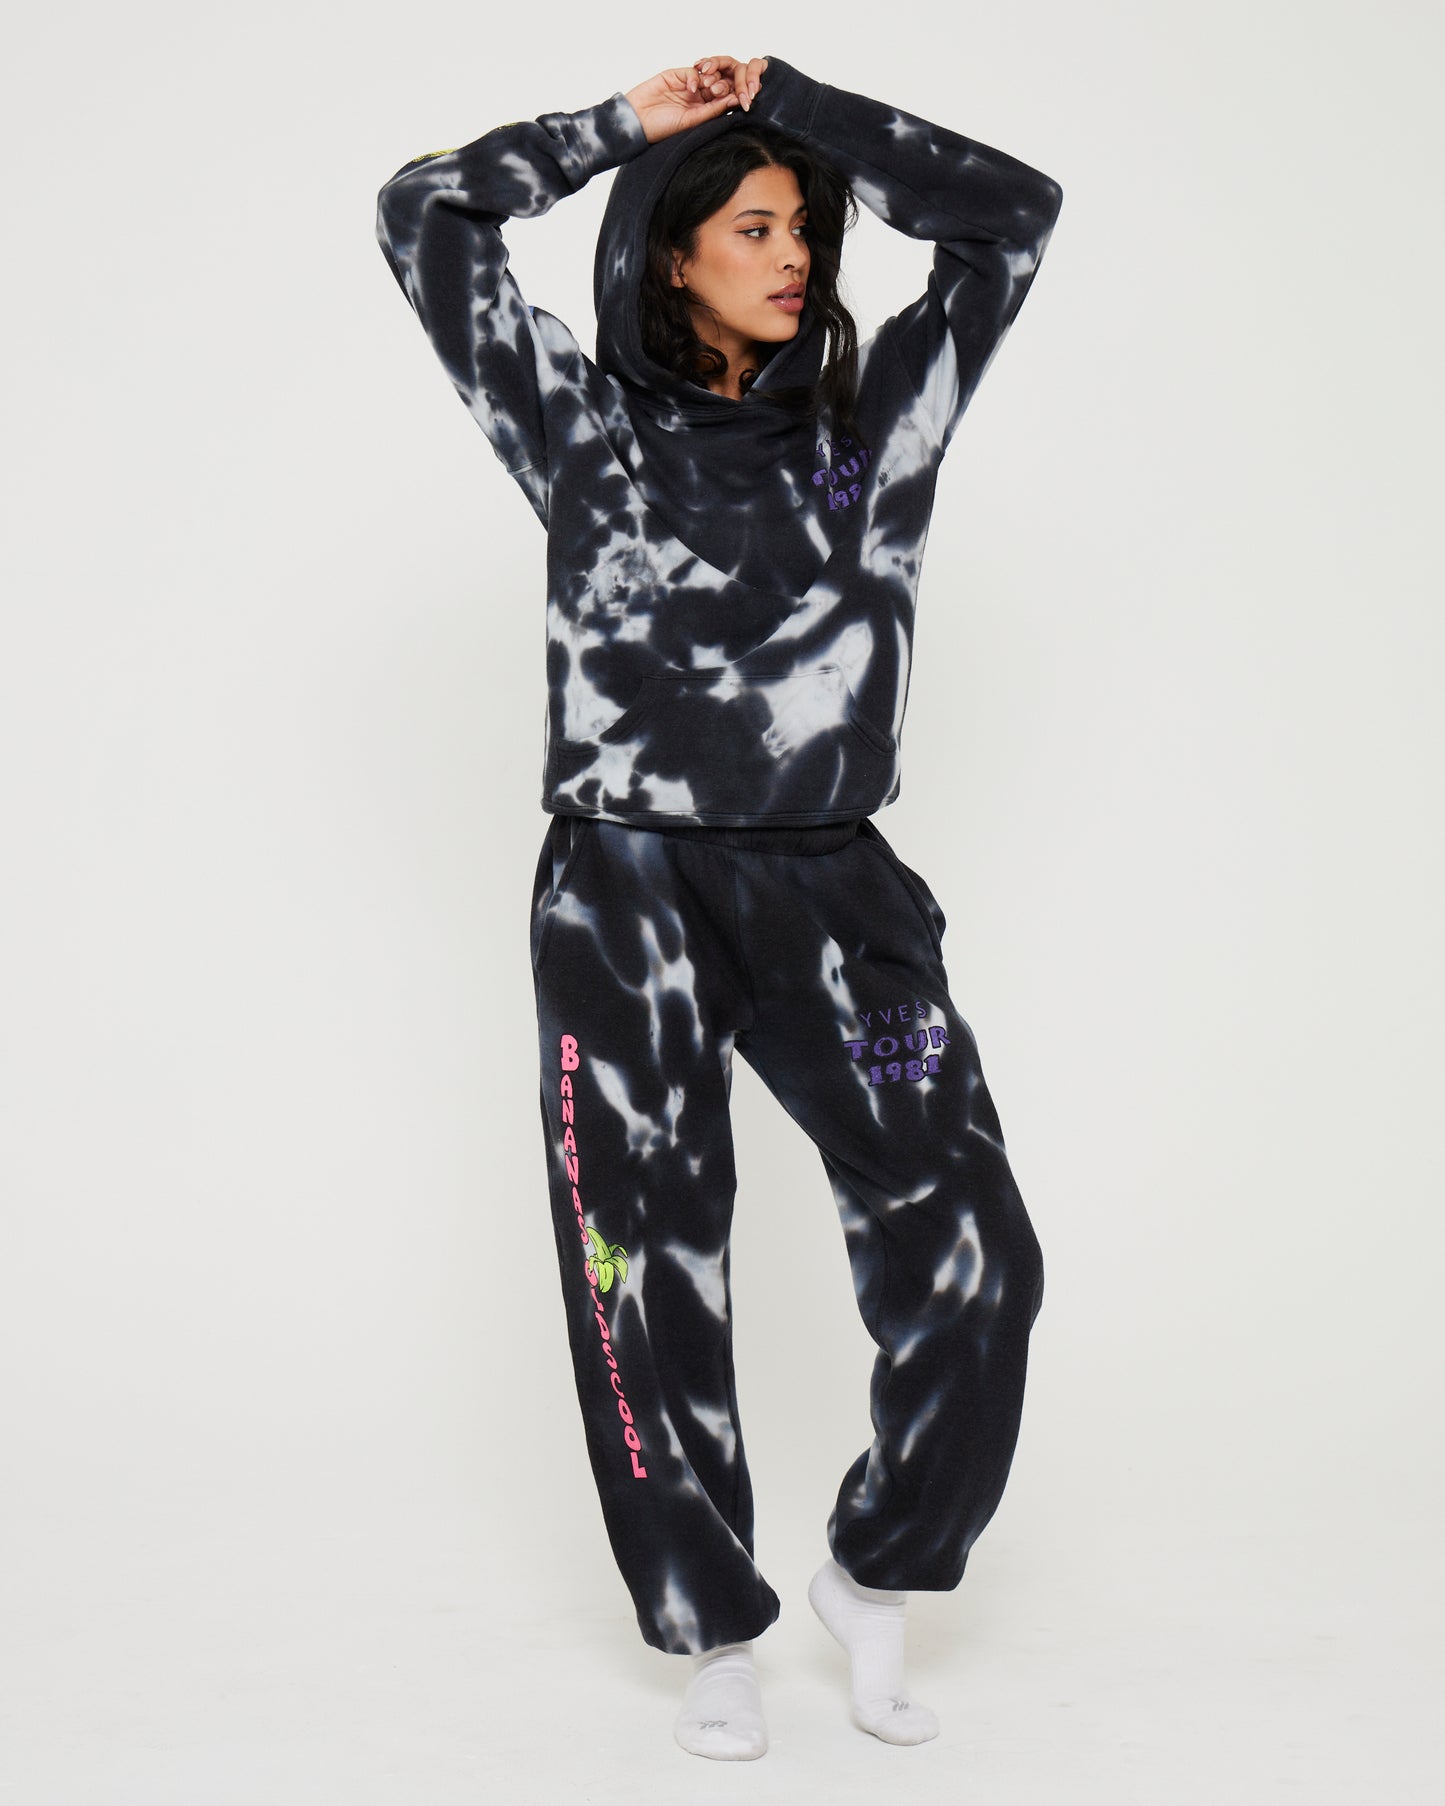 Banana Old'Scool Sweatpant - Black and White Tiedye